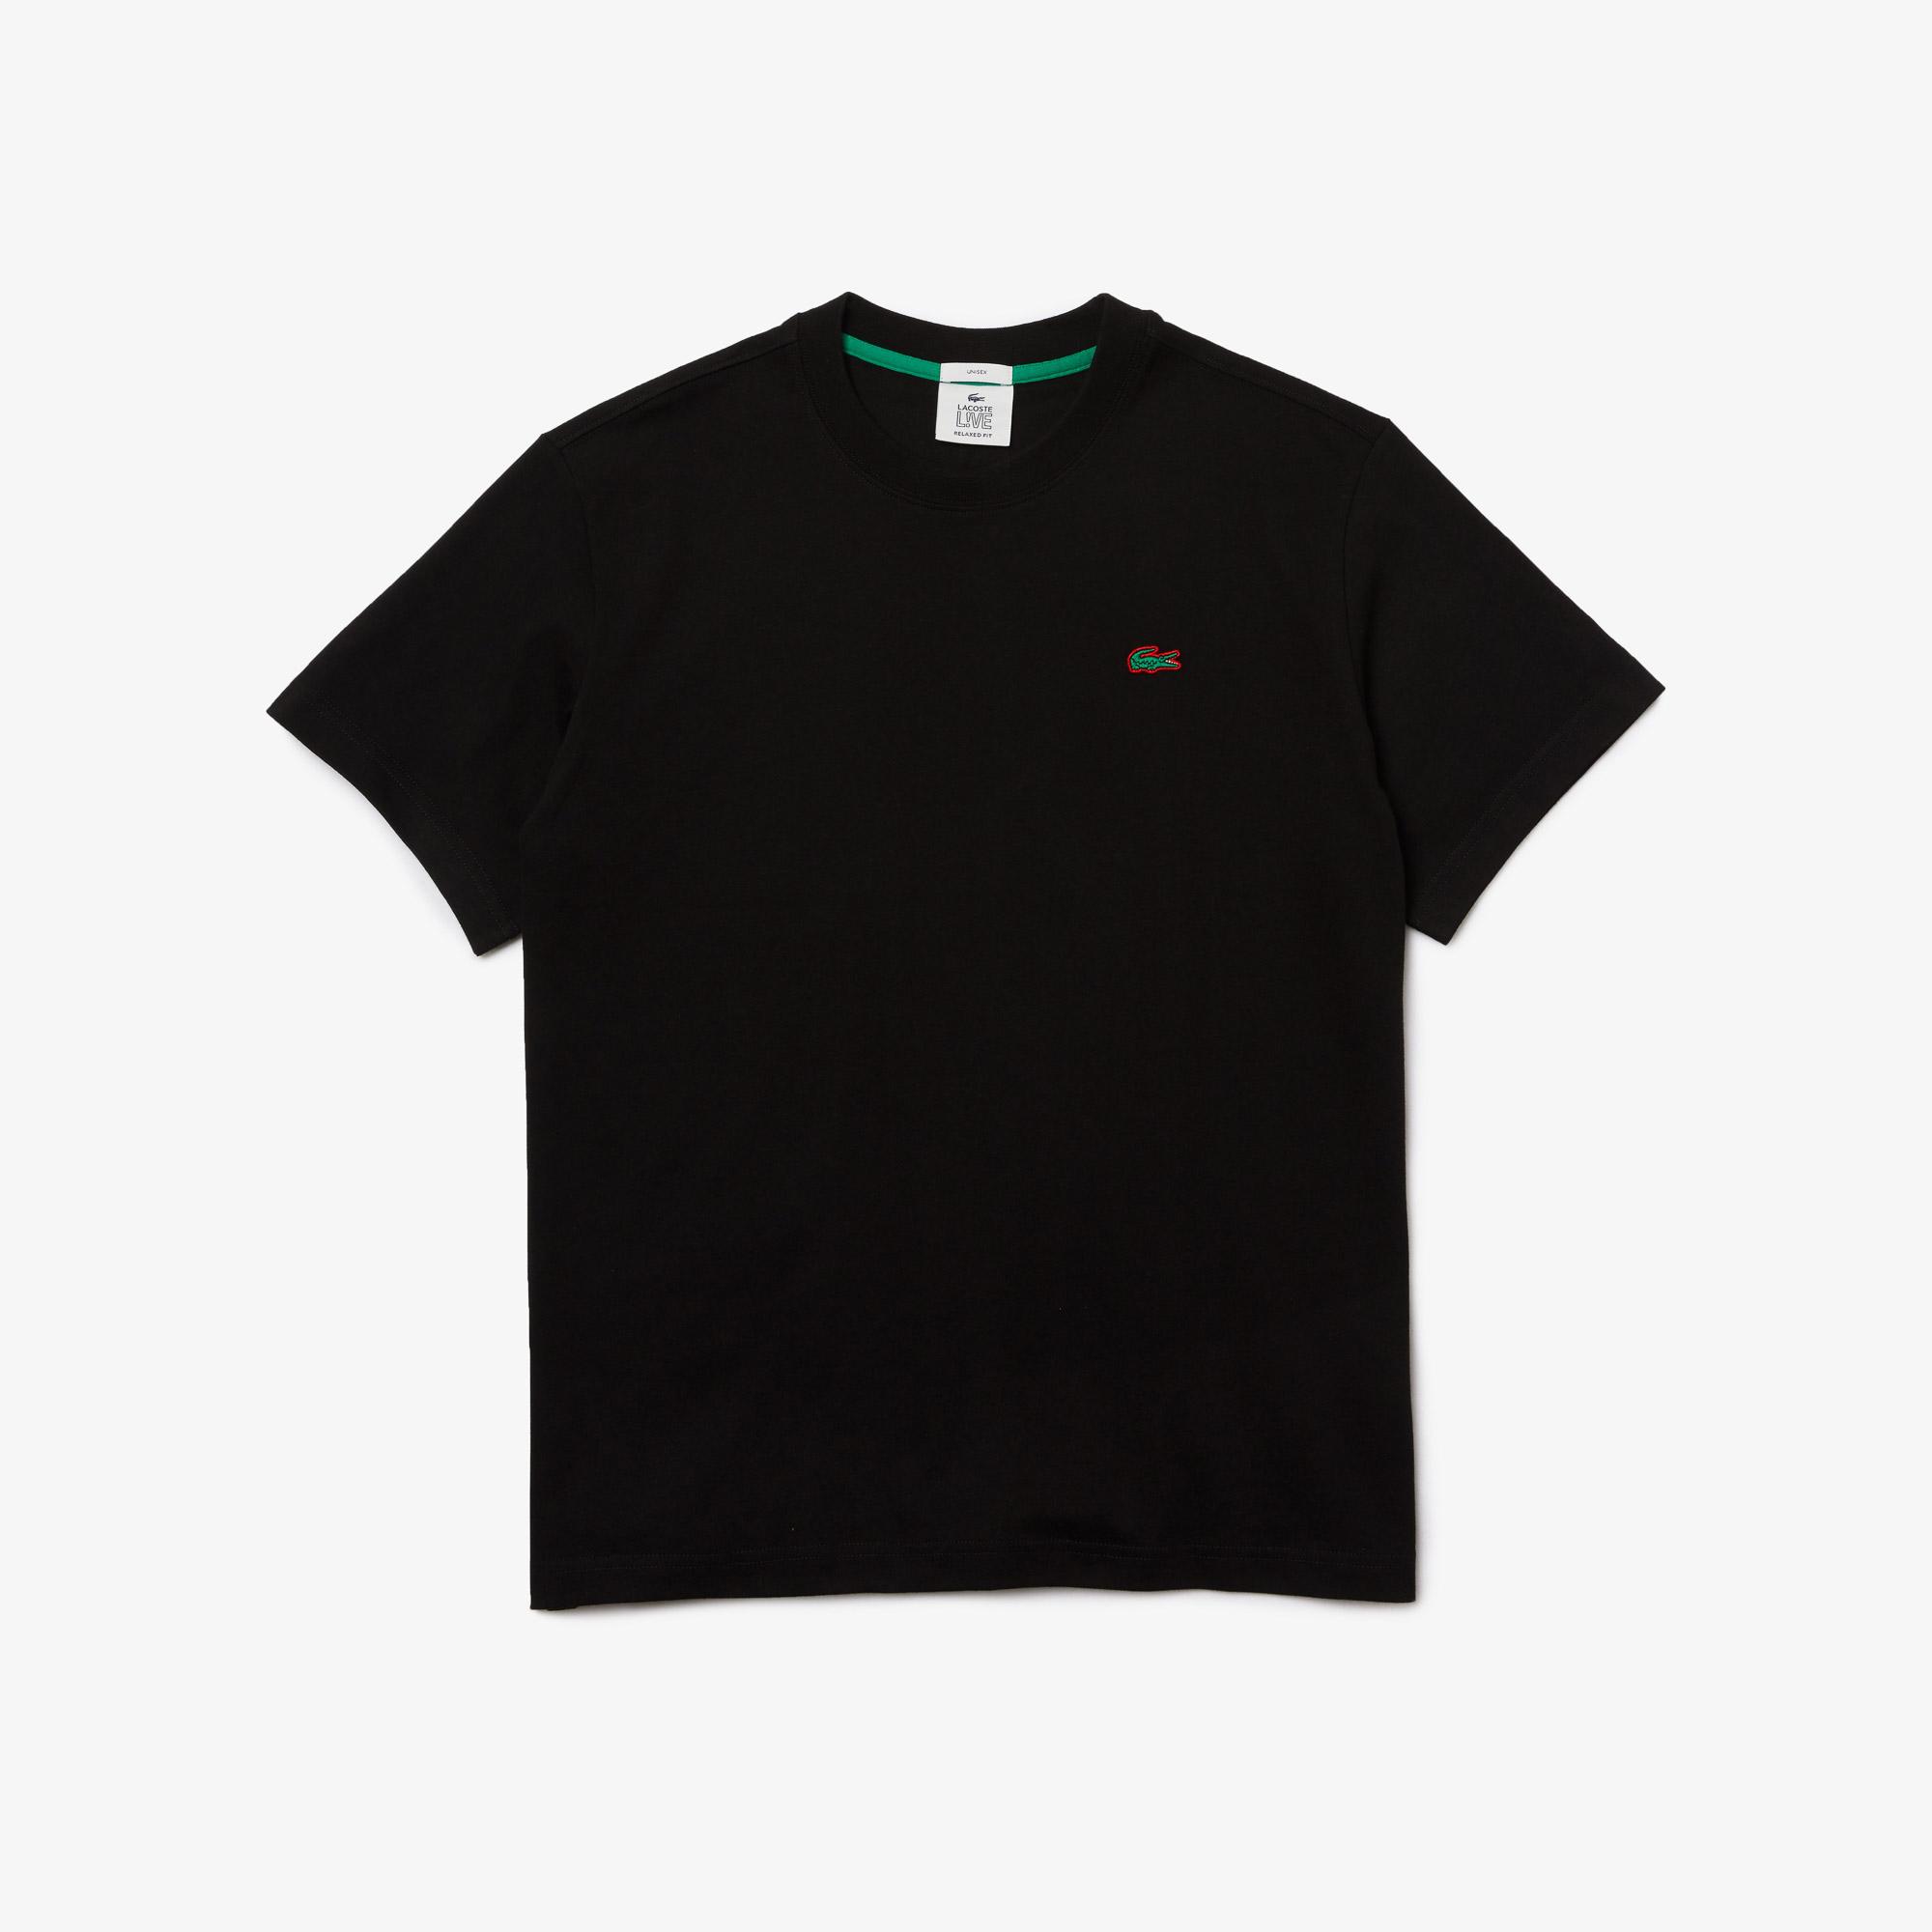 Lacoste L!VE Unisex Relaxed Fit Bisiklet Yaka Siyah T-Shirt. 6